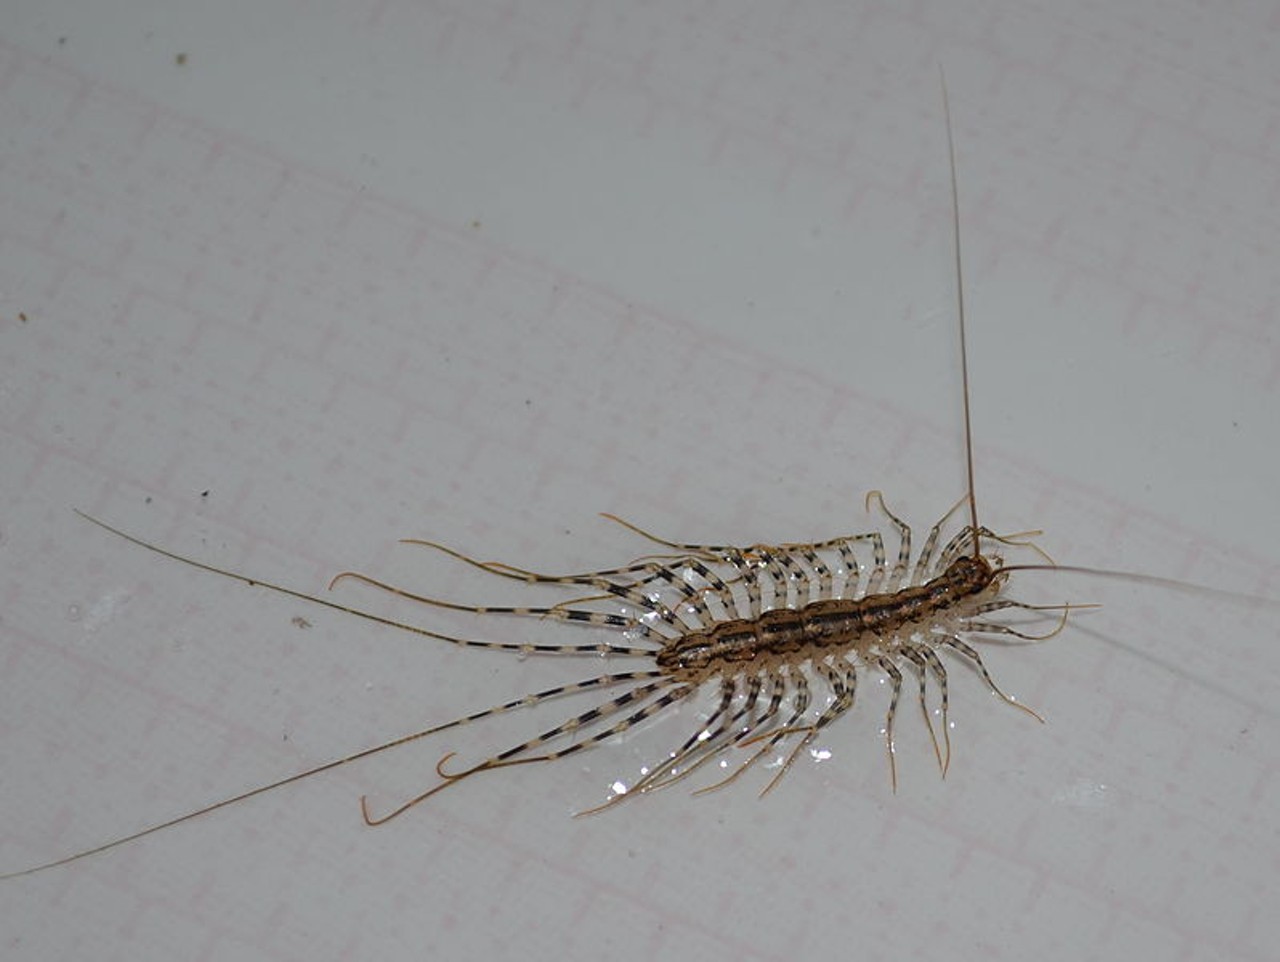 You&#146;re not afraid of house centipedes, because you grew up occasionally finding them in your house and they&#146;ve lost their terrifying power
Photo via Wikimedia Commons